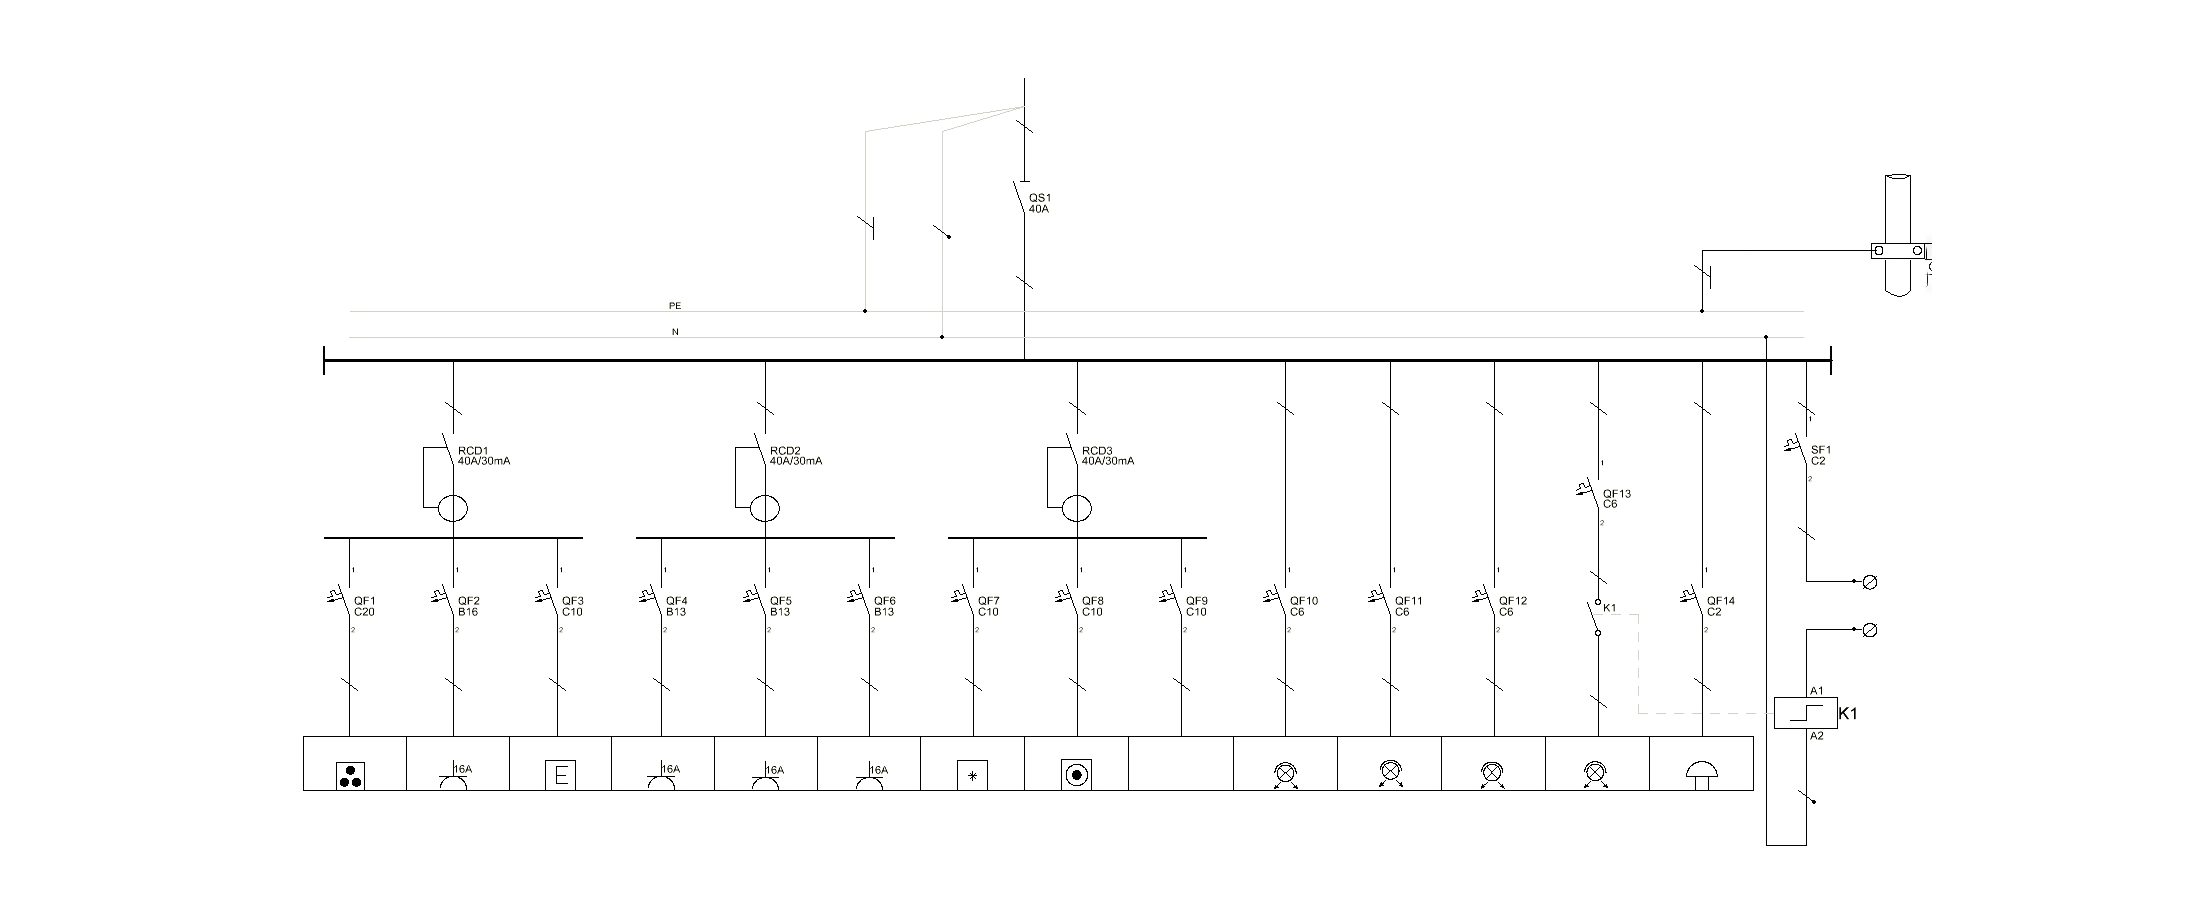 Single Line Diagram How To Represent The Electrical Installation Of A House Stacbond